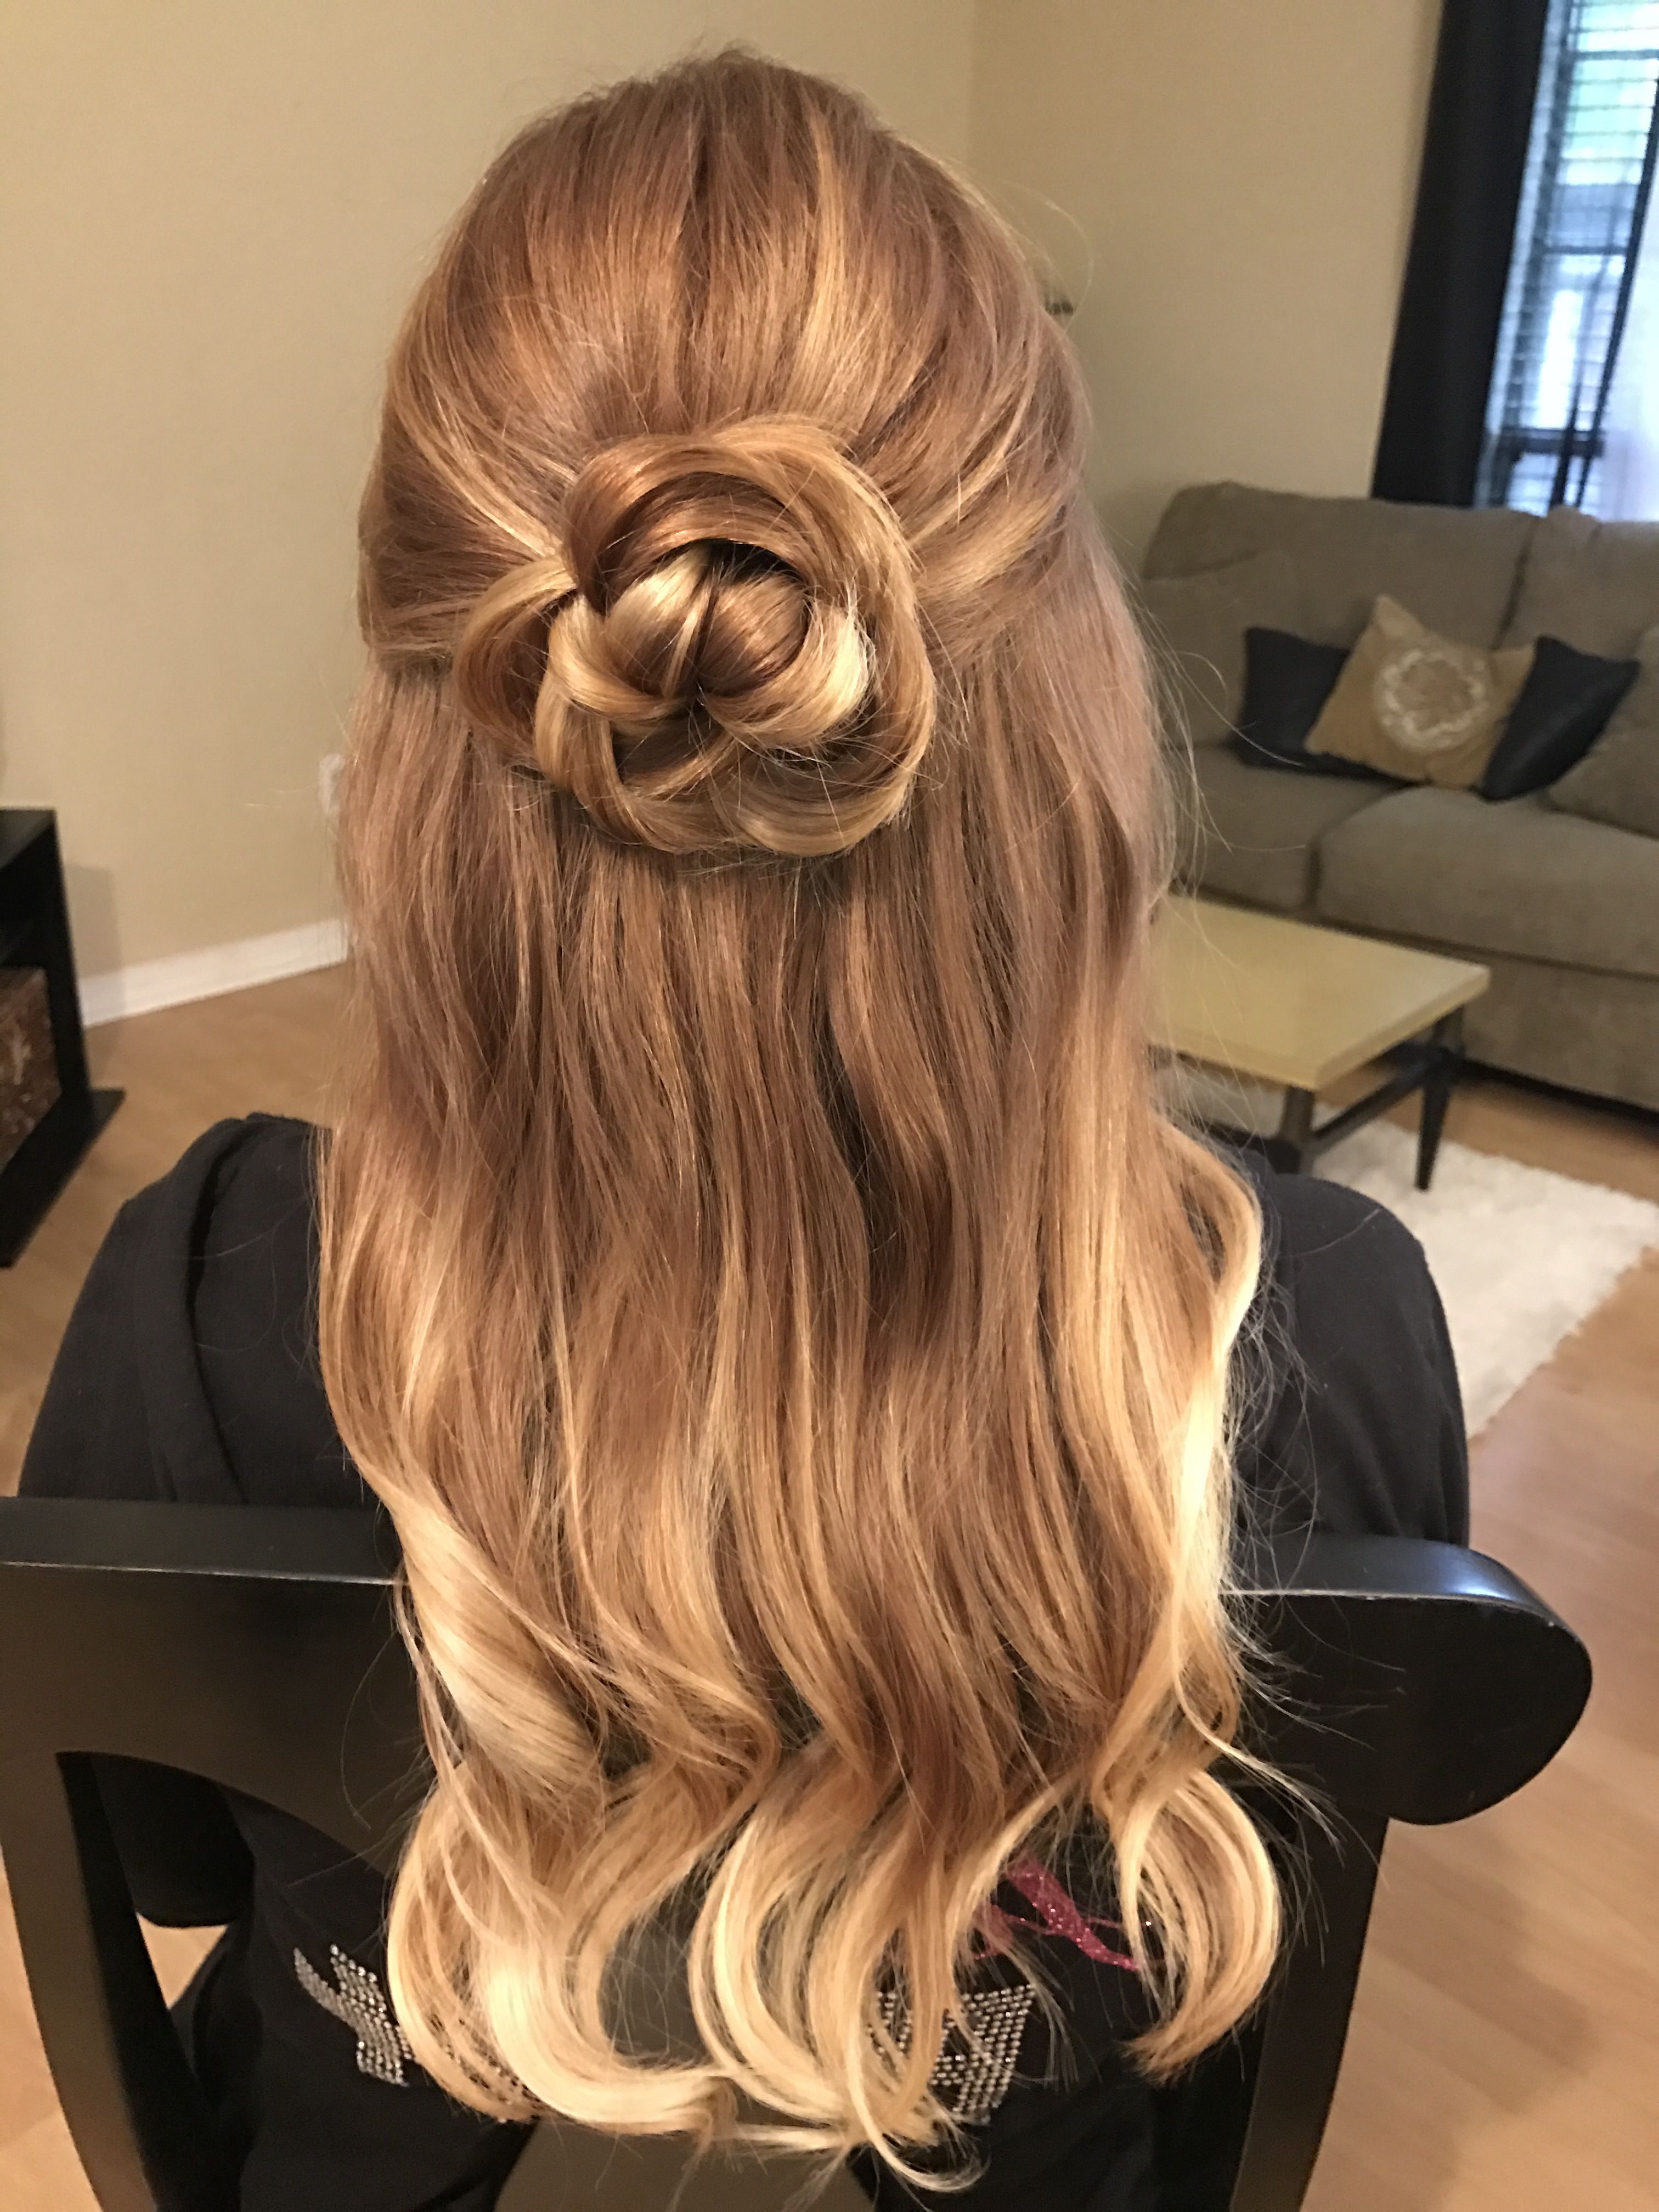 Rose Flower Hair Updo Half Up Half Down Hairstyle For Prom Bride Or Regarding Latest Golden Half Up Half Down Curls Bridal Hairstyles (View 7 of 20)